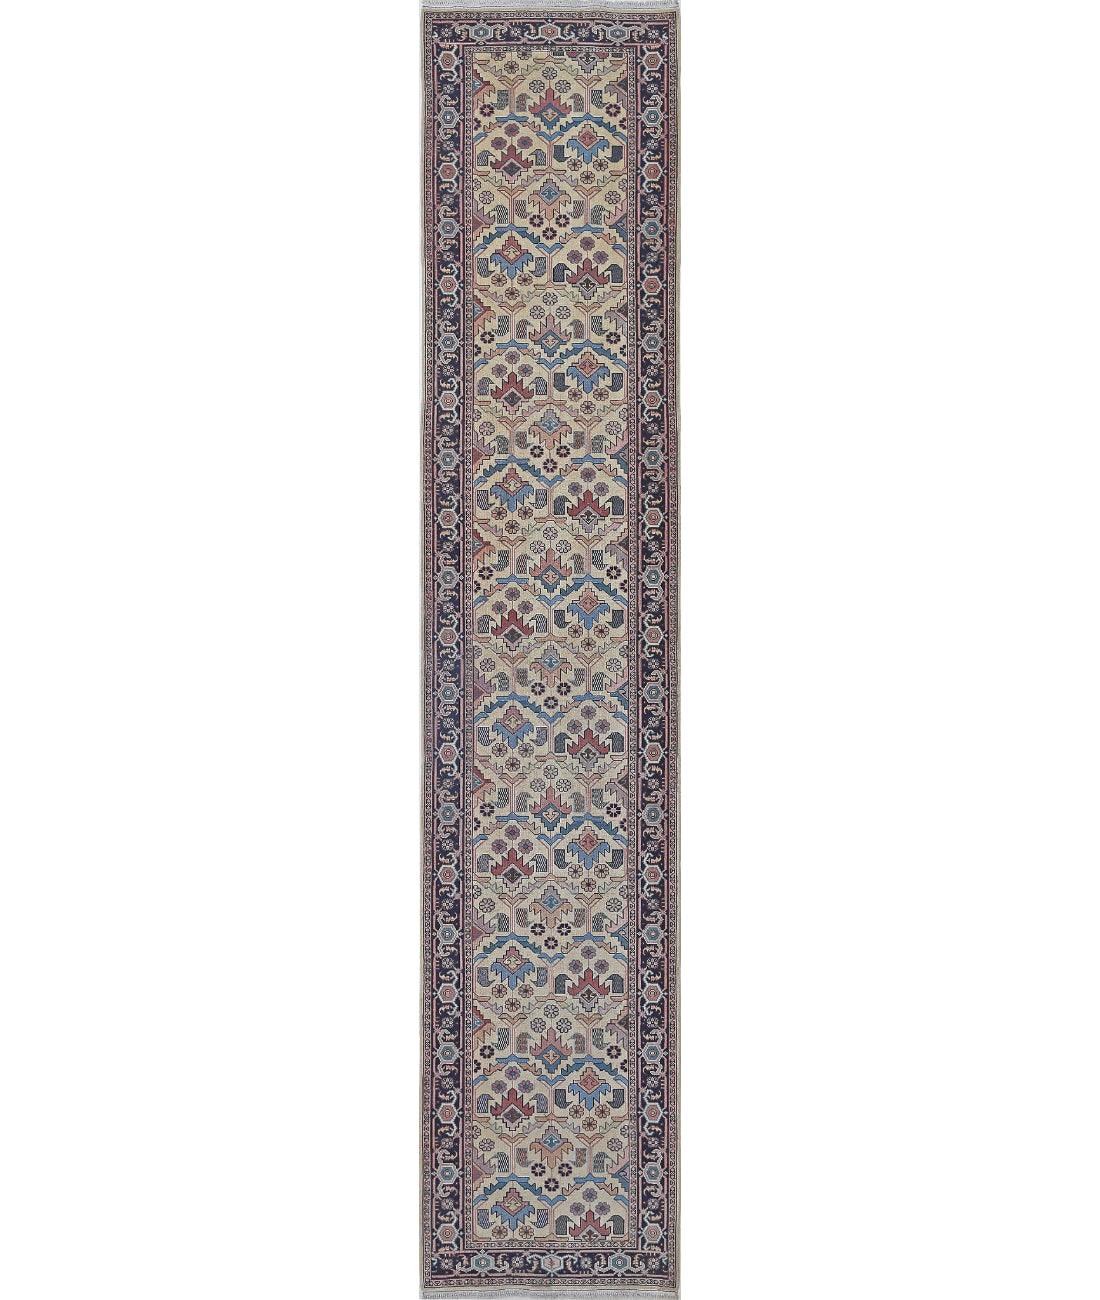 Hand Knotted Heritage Persian Style Wool Rug - 2&#39;8&#39;&#39; x 13&#39;7&#39;&#39; 2&#39;8&#39;&#39; x 13&#39;7&#39;&#39; (80 X 408) / Beige / Blue